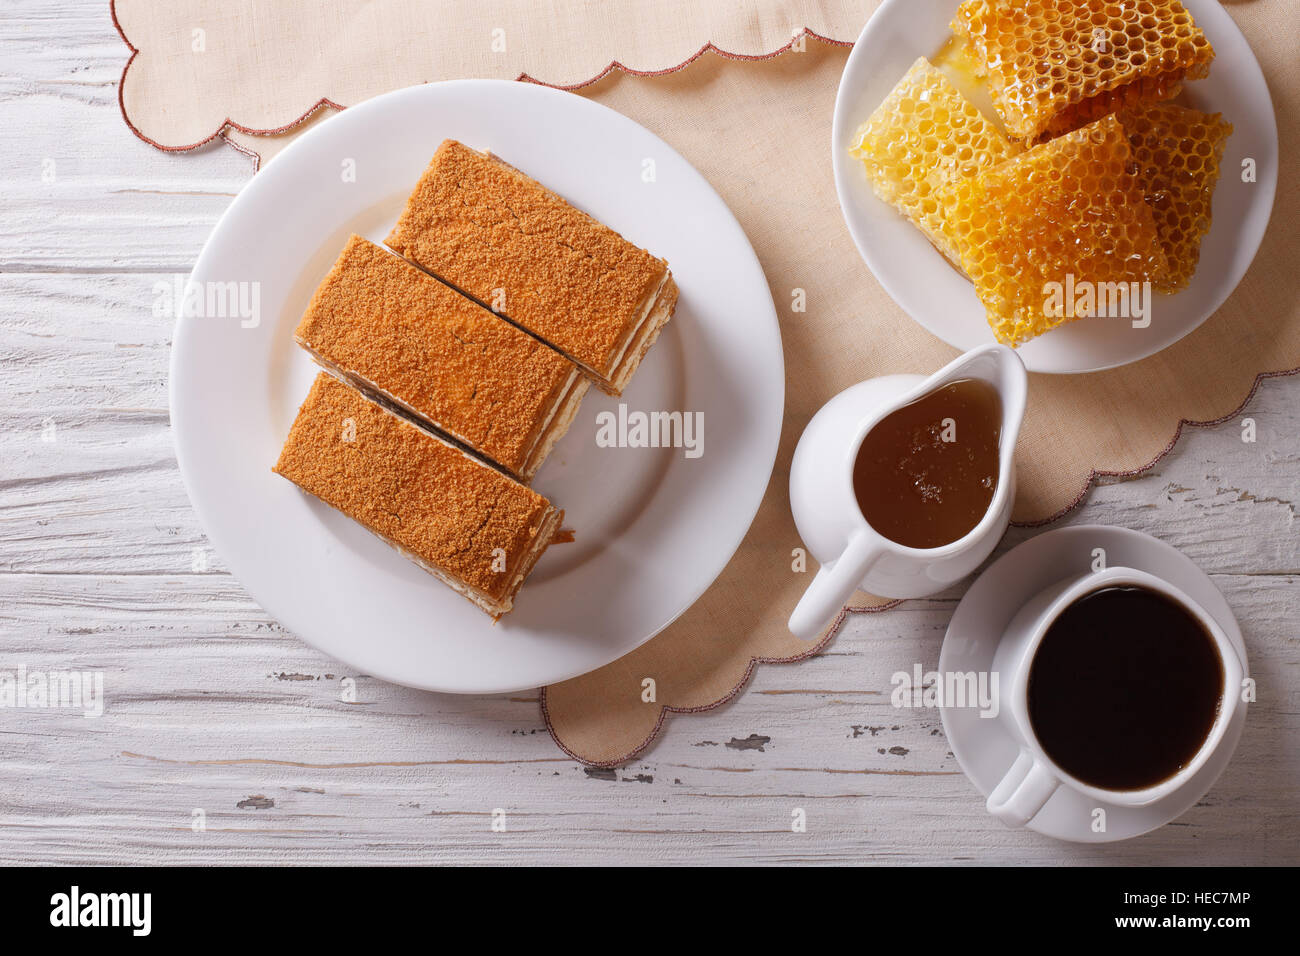 Sliced honey cake on a plate, coffee, and a honeycomb. Horizontal top view Stock Photo